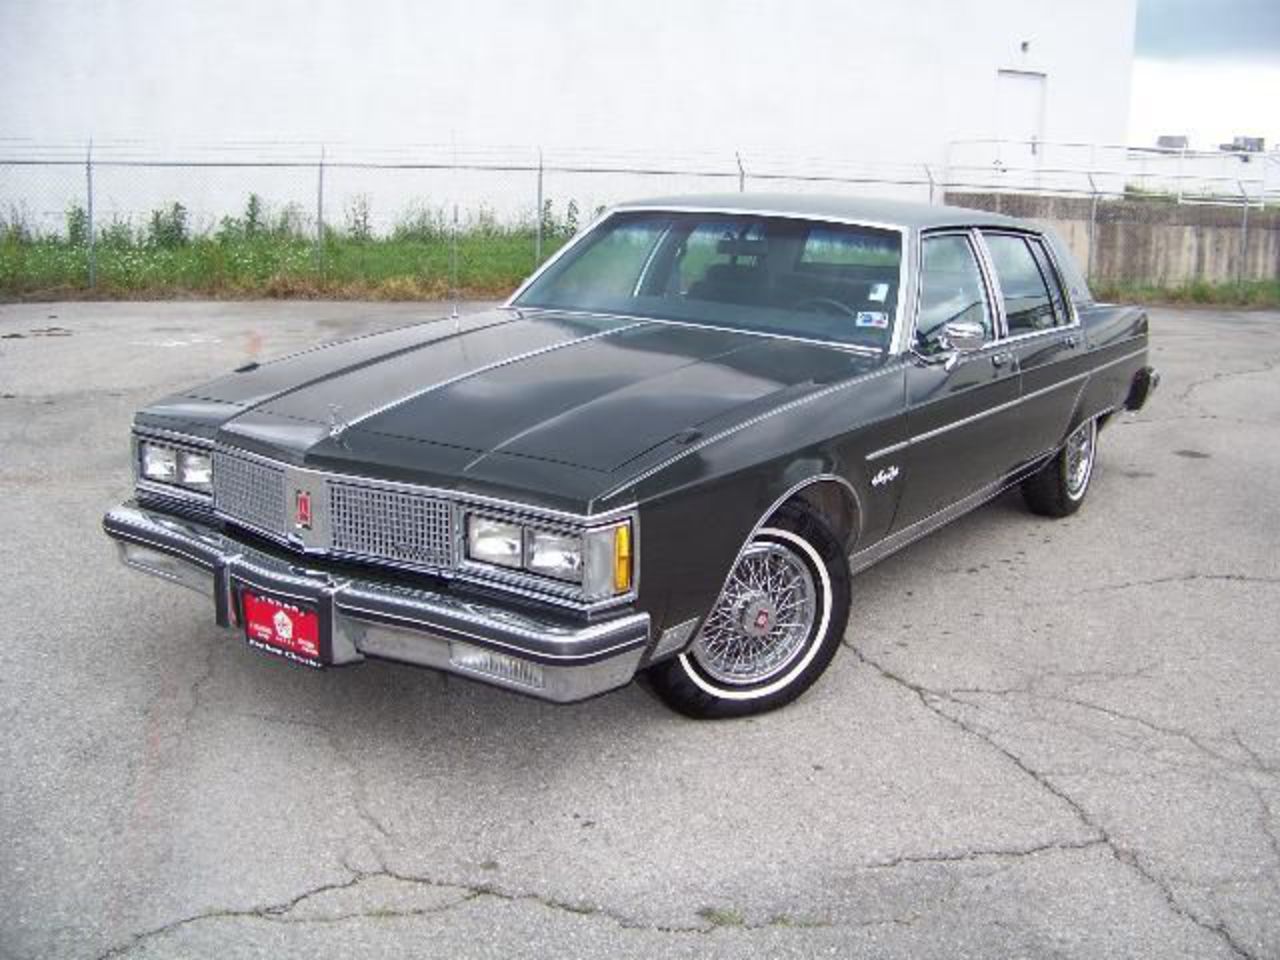 Oldsmobile 98 4dr. View Download Wallpaper. 640x480. Comments